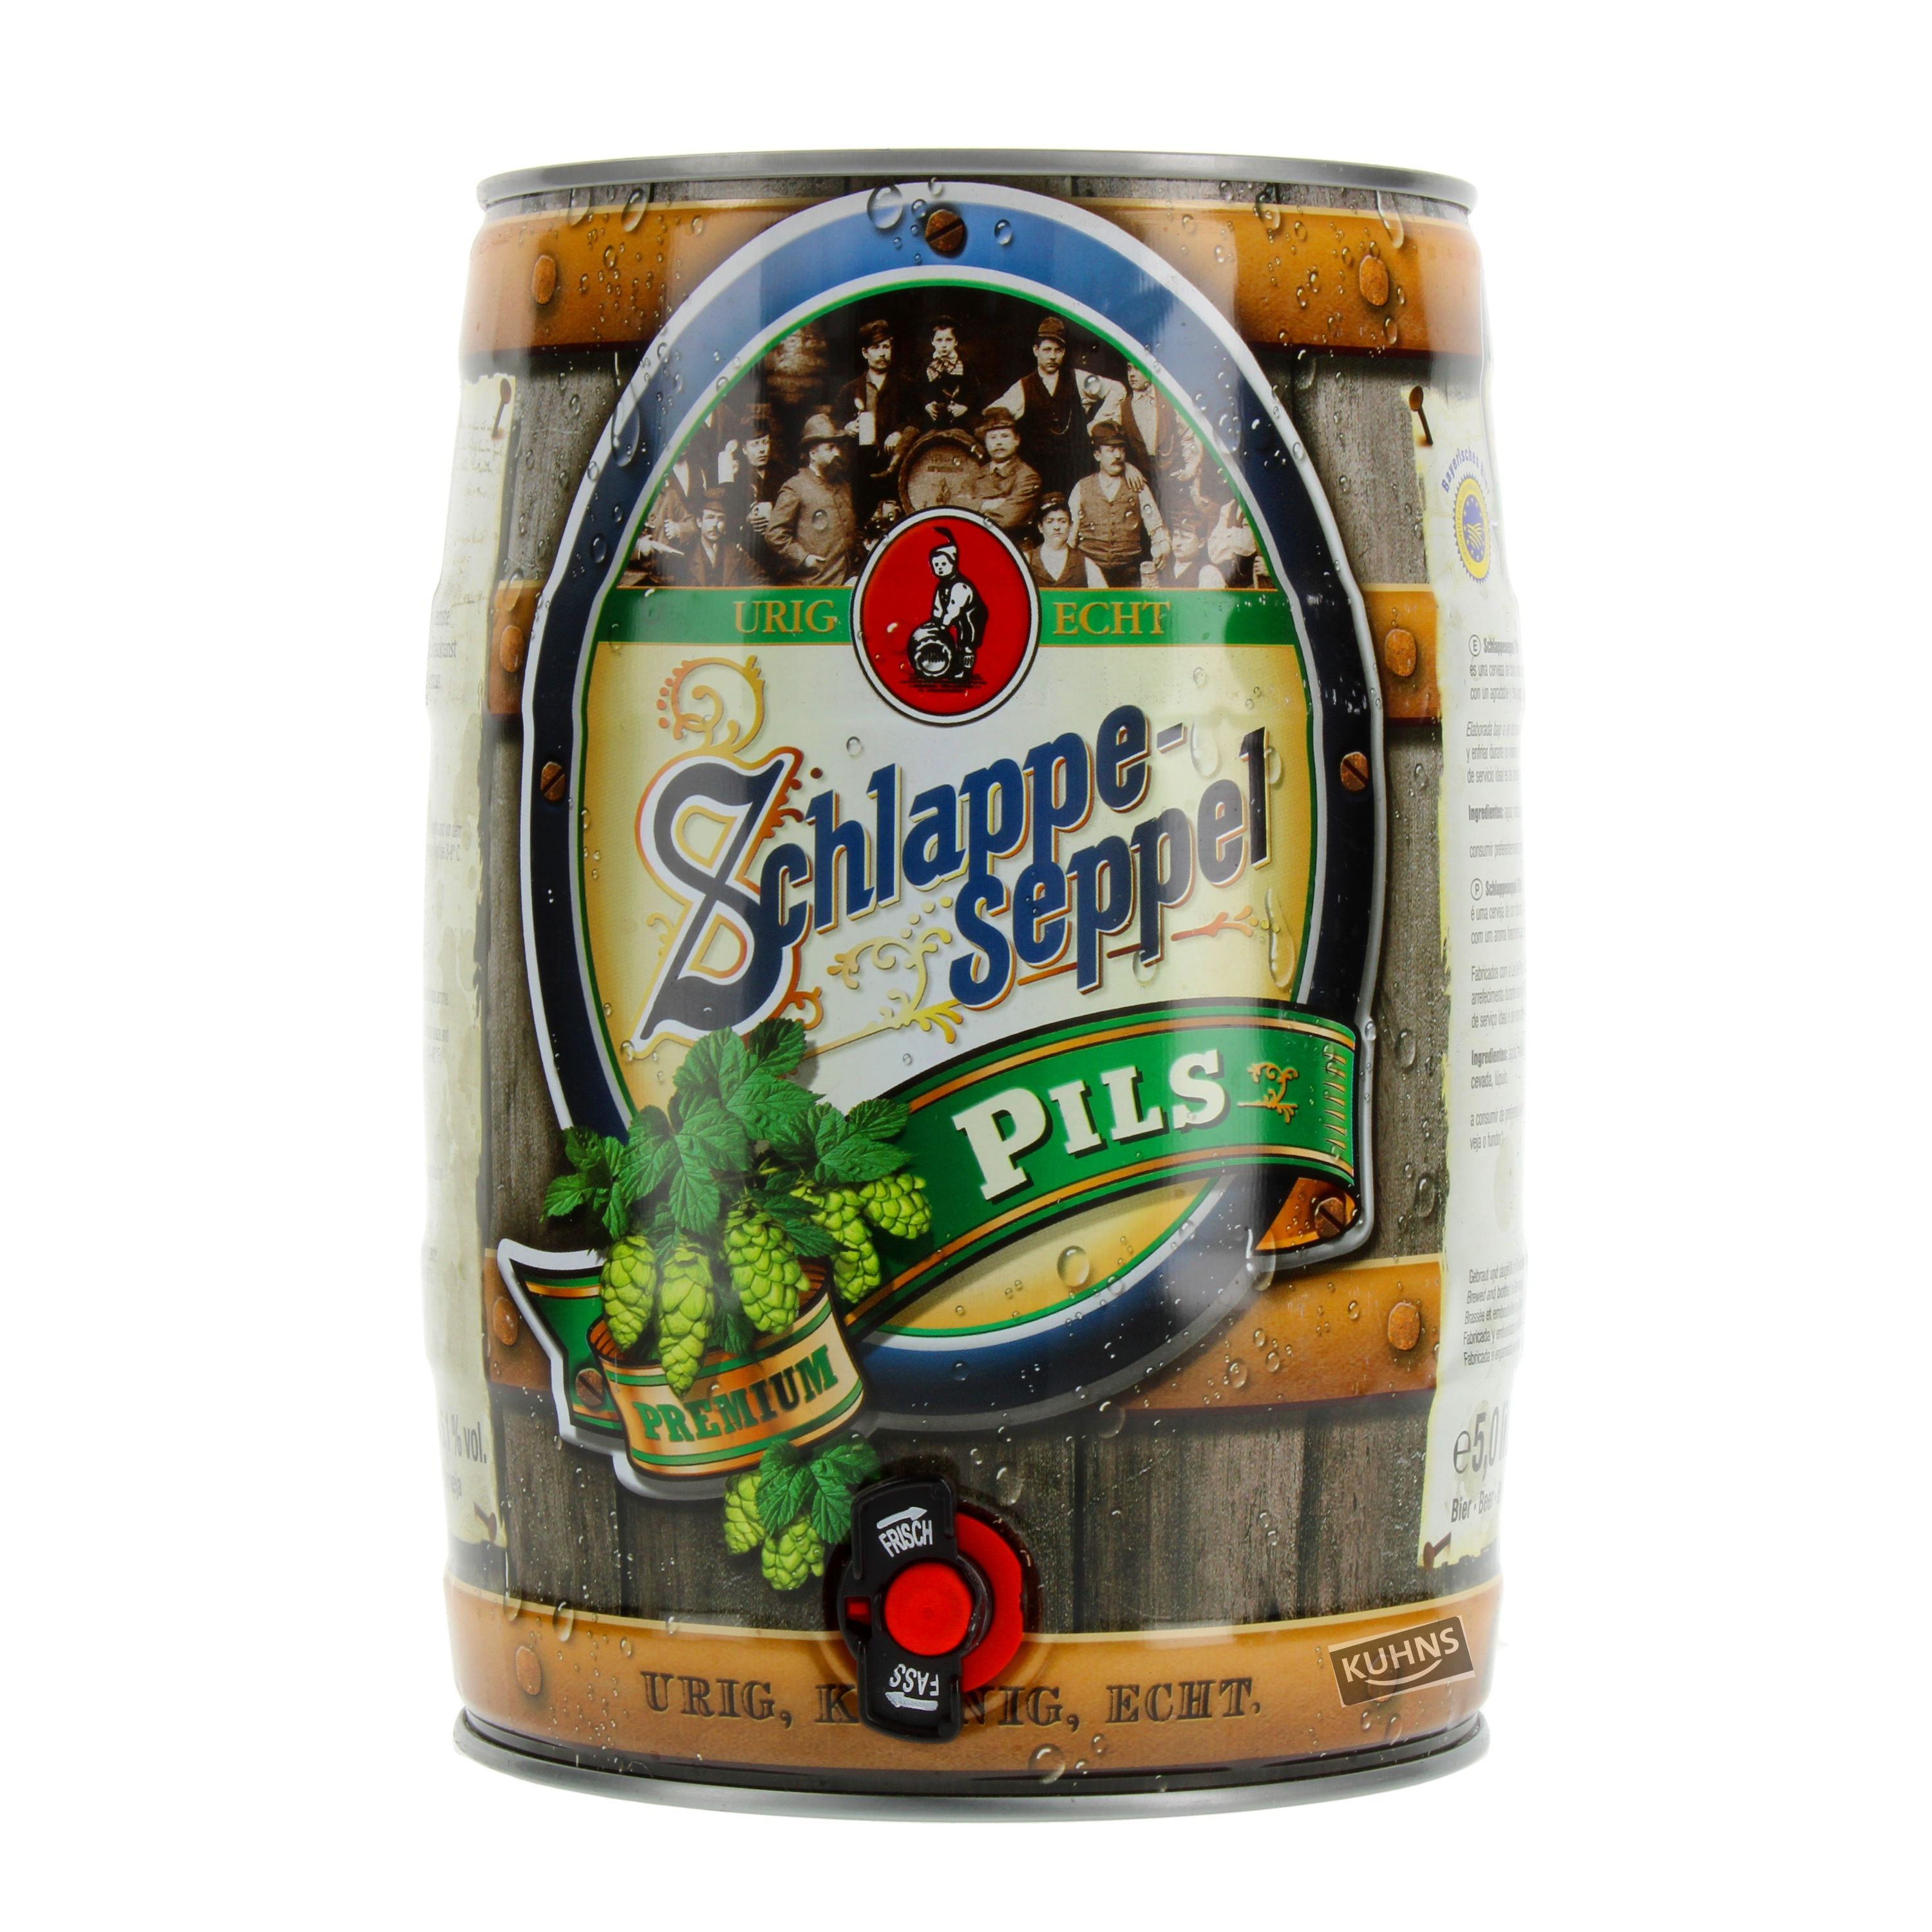 Schlappeseppel Pils party keg 5.0l, alc. 5.1% by volume